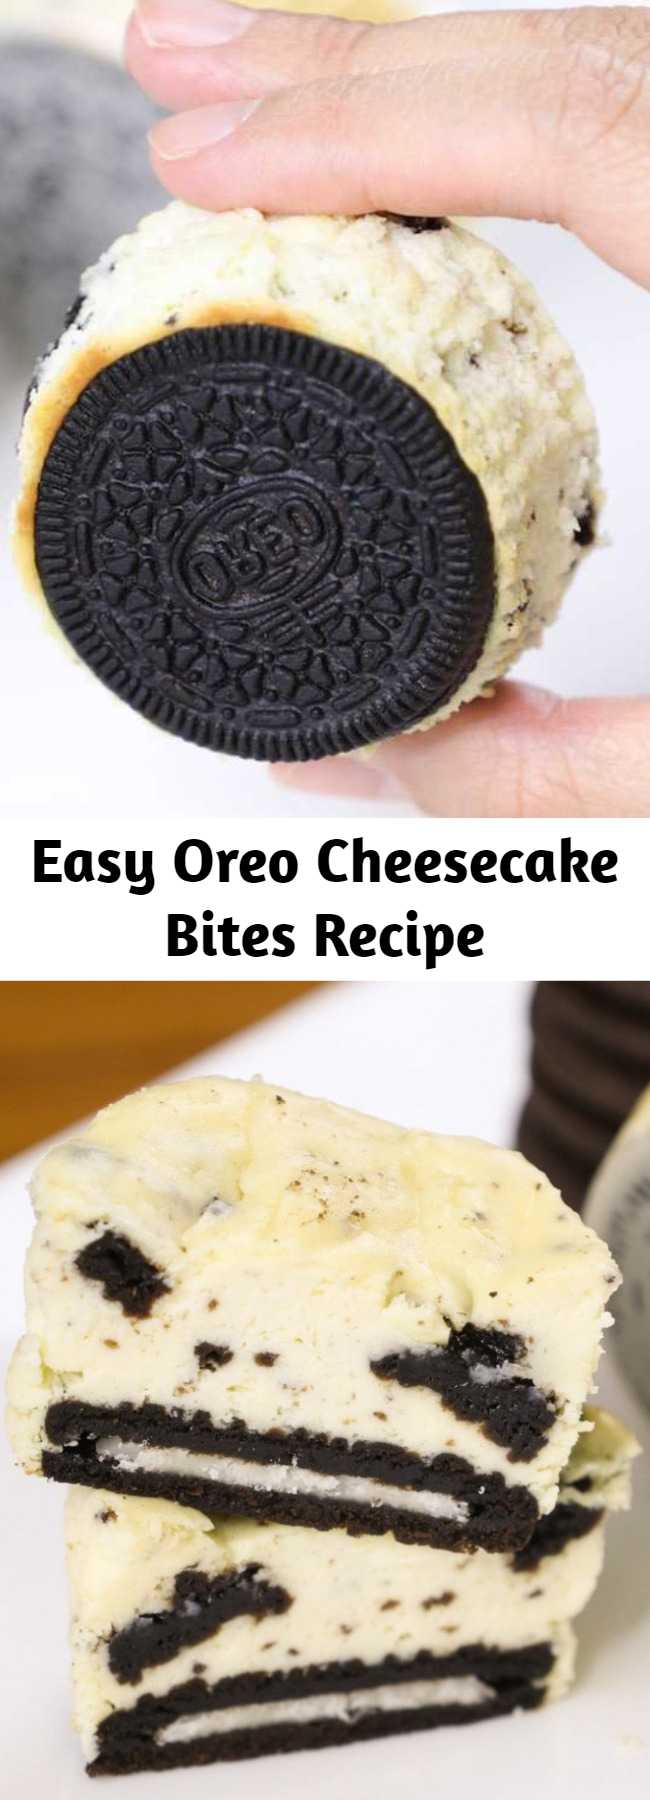 Easy Oreo Cheesecake Bites Recipe - Oreo Cheesecake Bites are creamy and soft mini cheesecakes with a delicious oreo crust at the bottom. They are so easy to make and a guaranteed hit at any parties!